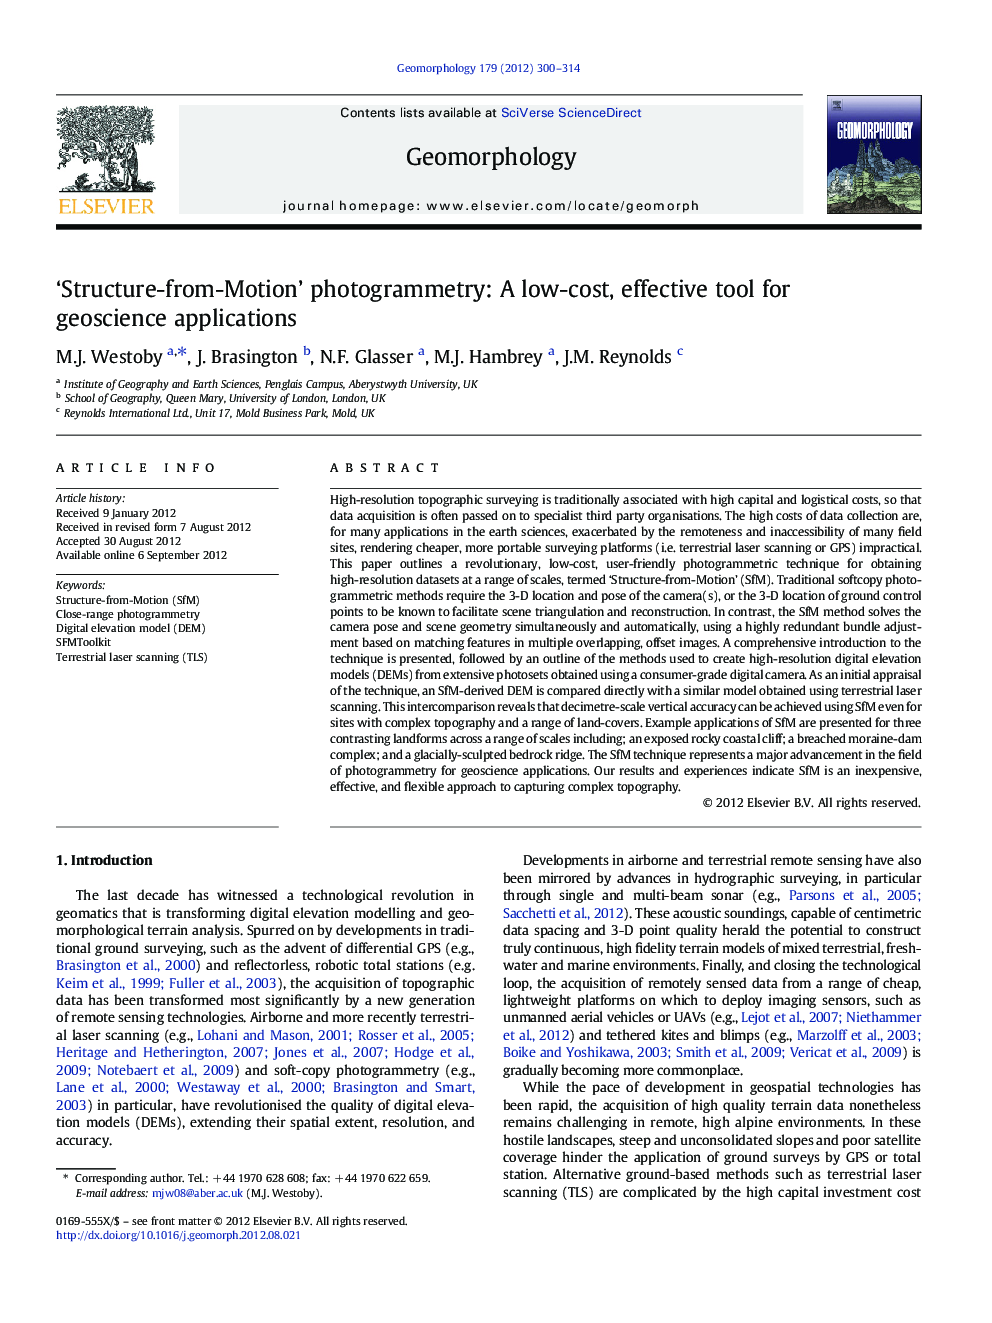 ‘Structure-from-Motion’ photogrammetry: A low-cost, effective tool for geoscience applications